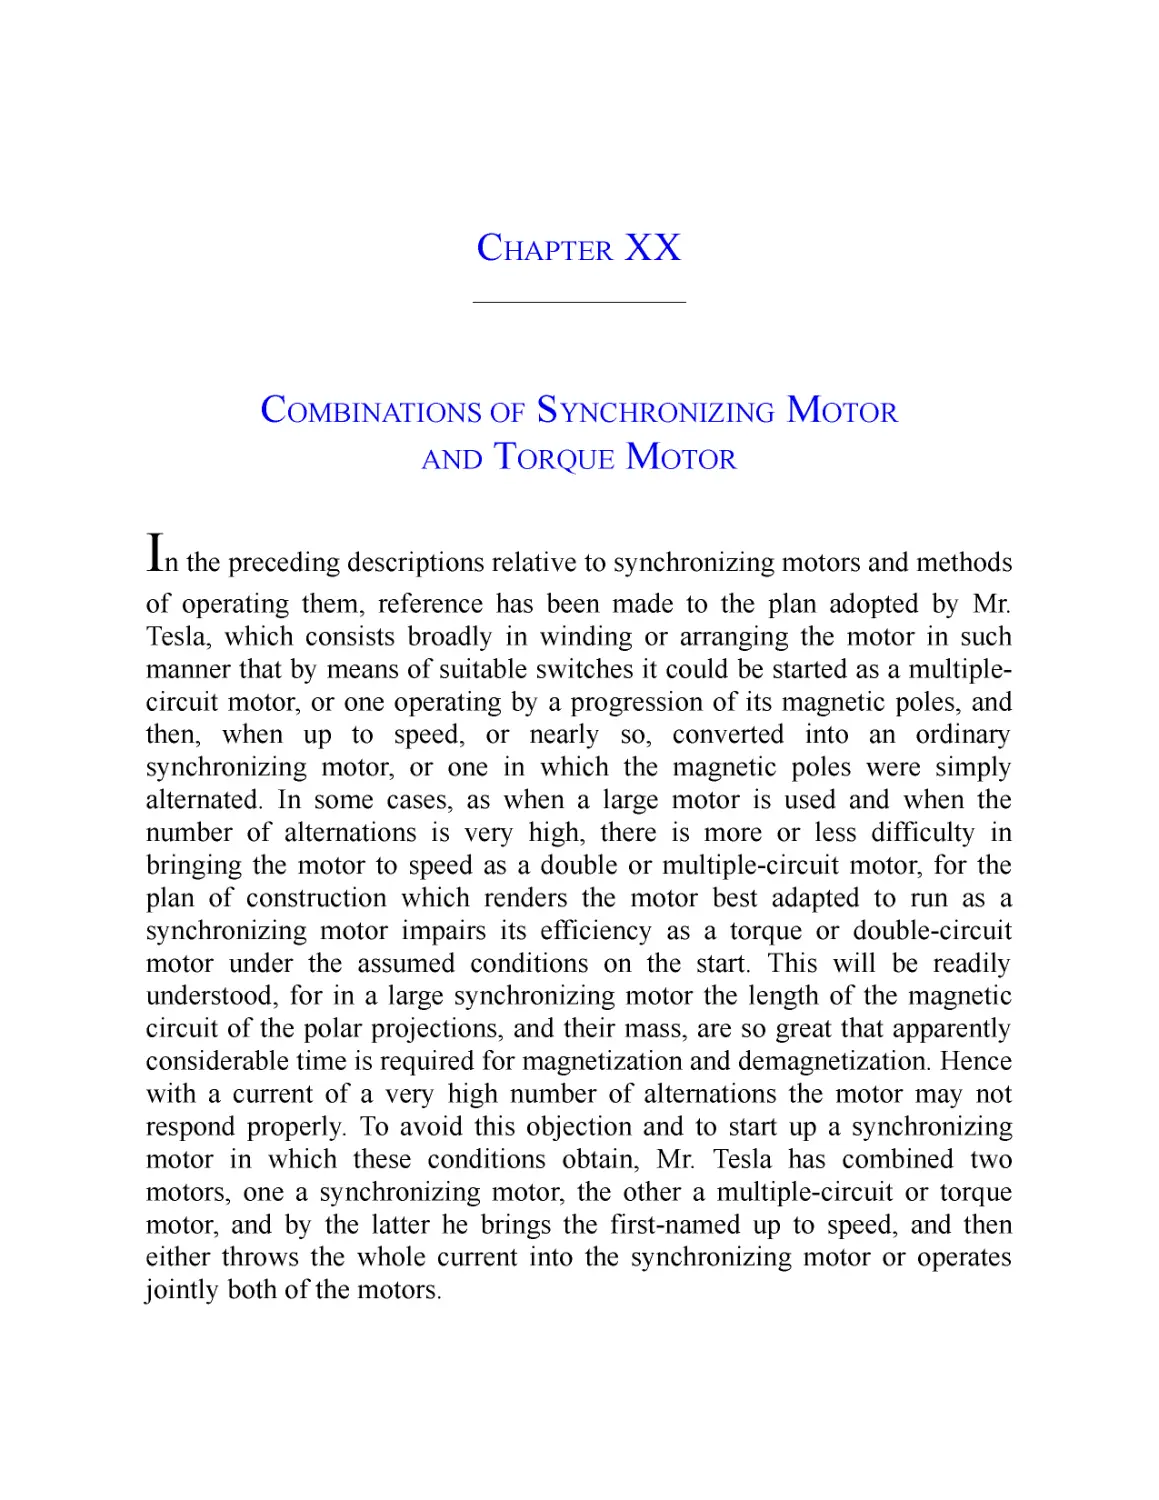 ﻿Chapter XX: Combinations of Synchronizing Motor and Torque Moto